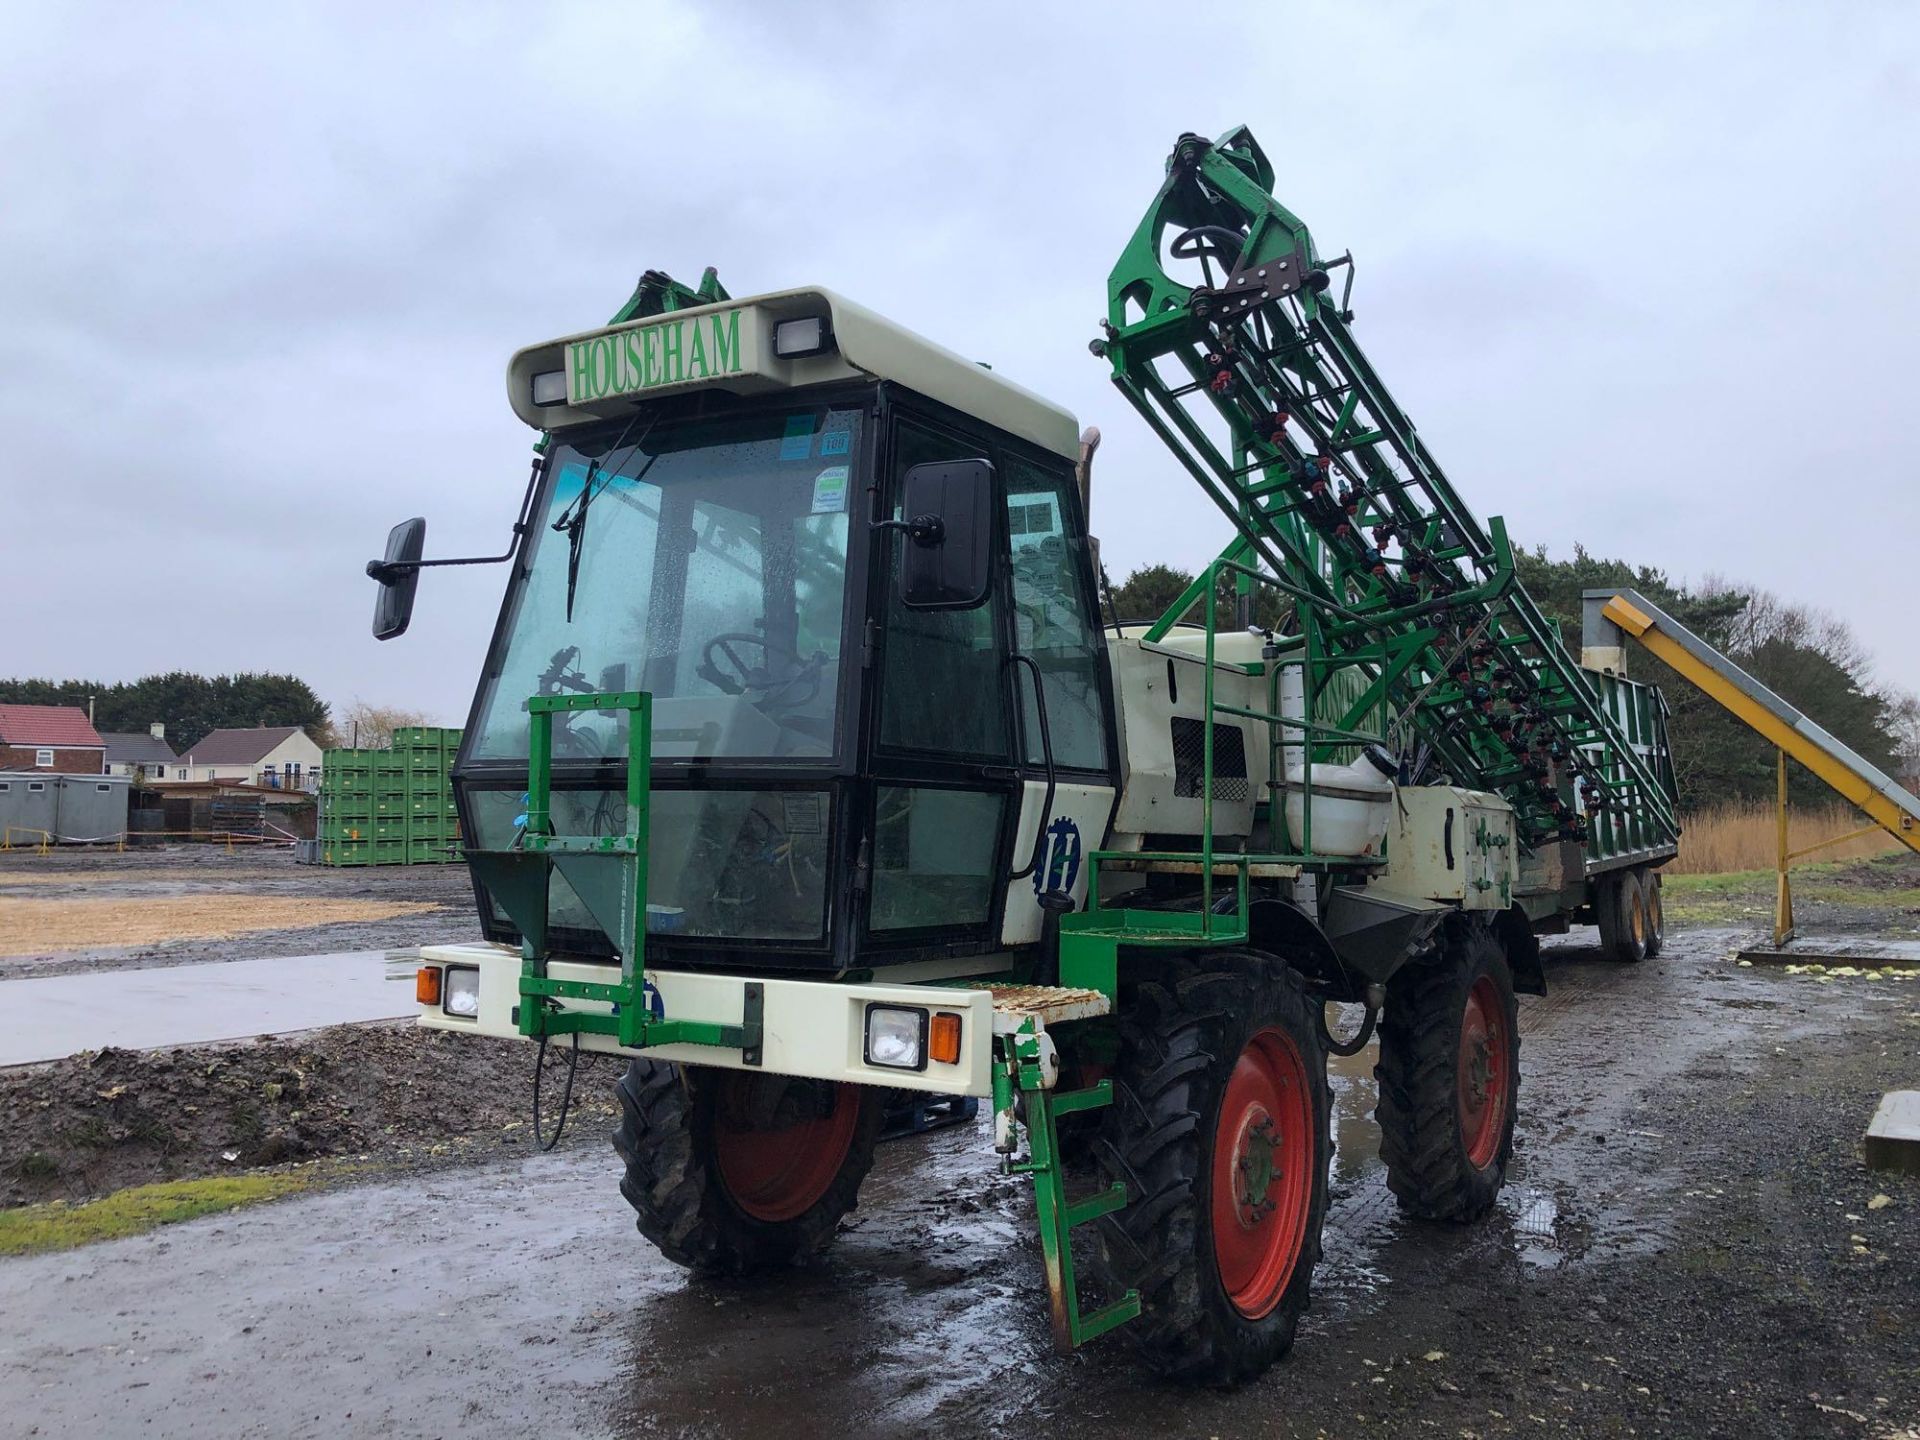 1999 Househam Sprint 24m self-propelled sprayer with 2000l tank on 300/85R32 front and 320/85R32 rea